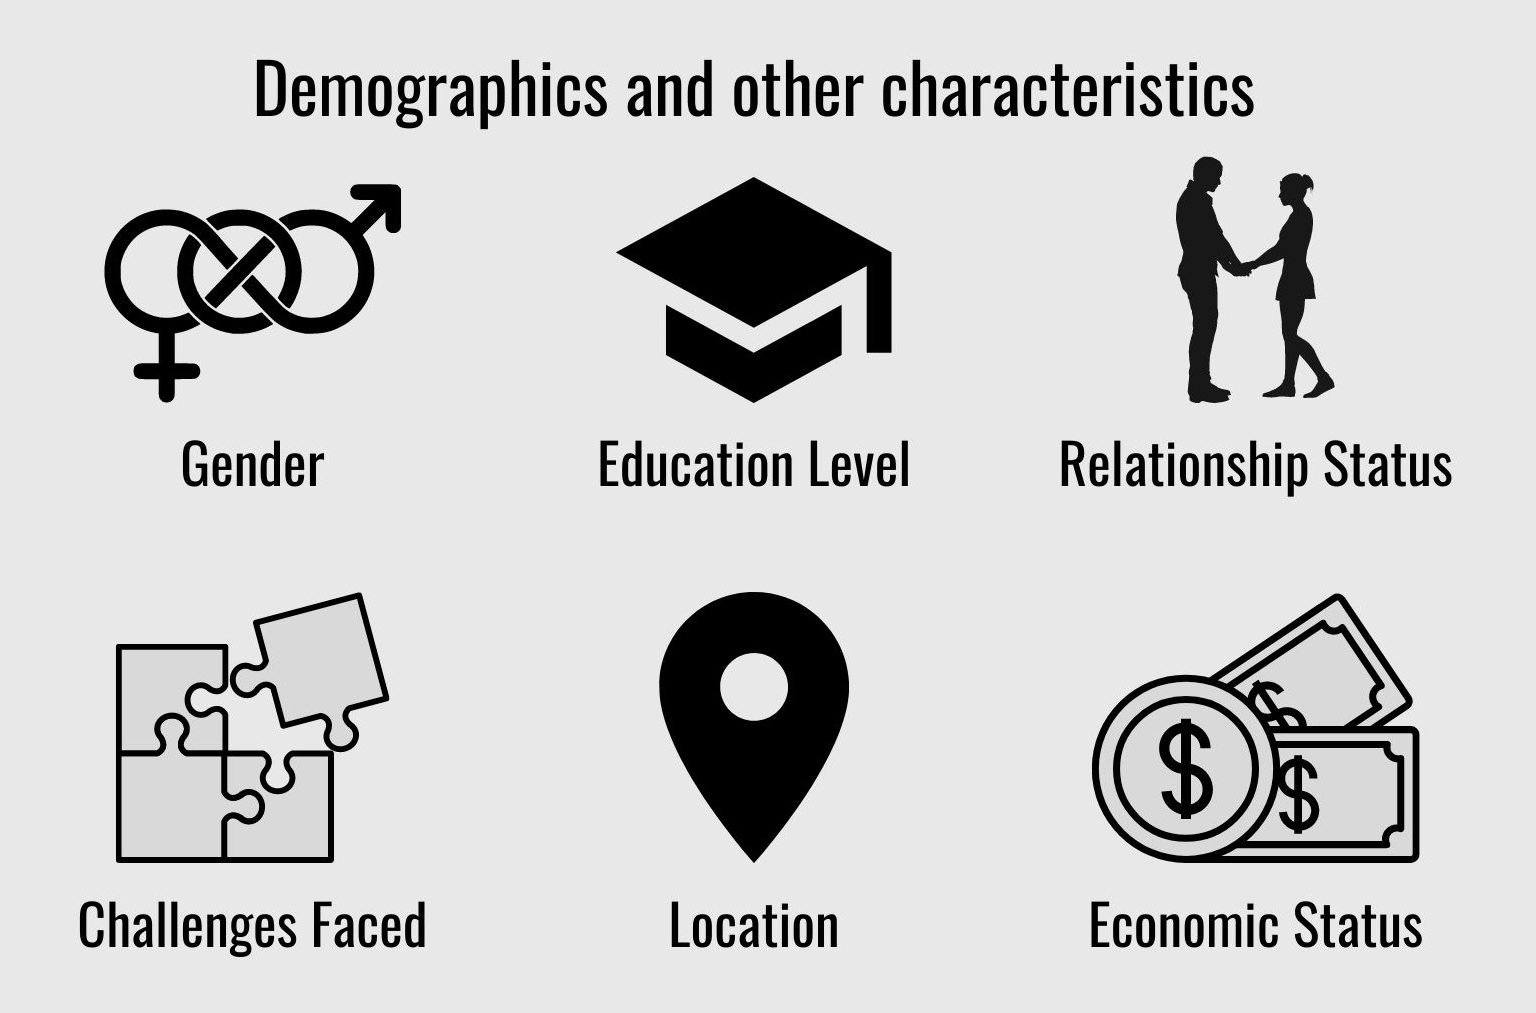 You can identify your target audiences based on demographics and different characteristics such as education level, economic status, challenges faced